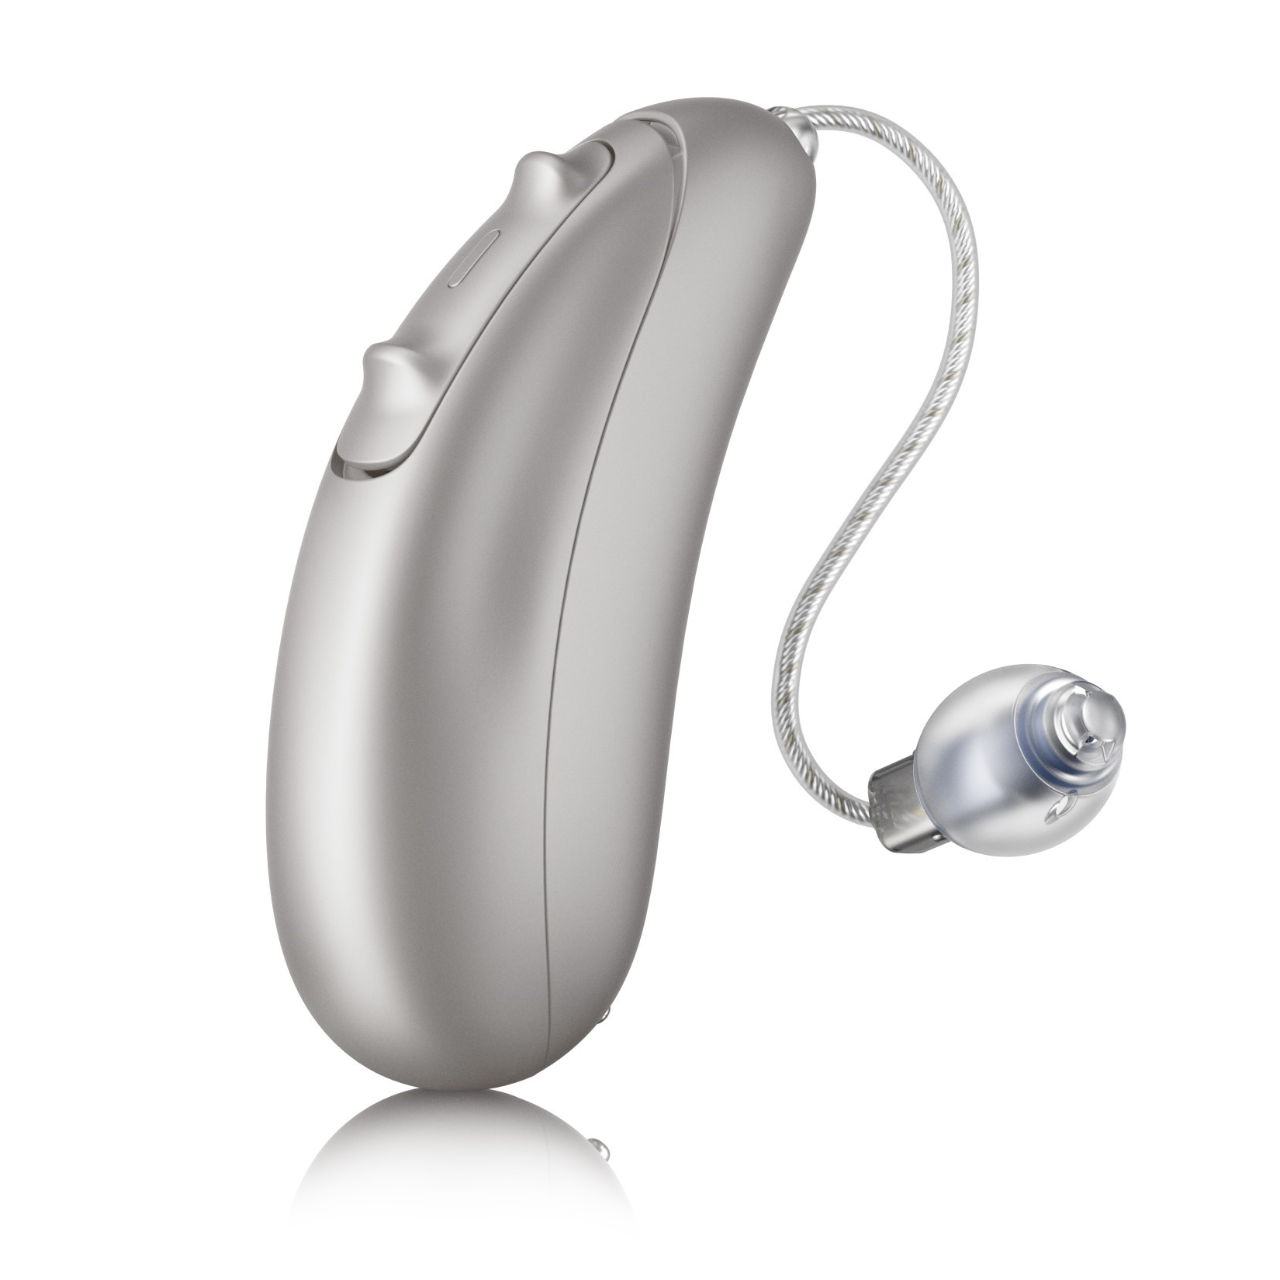 Relate4.0 RIC hearing aids